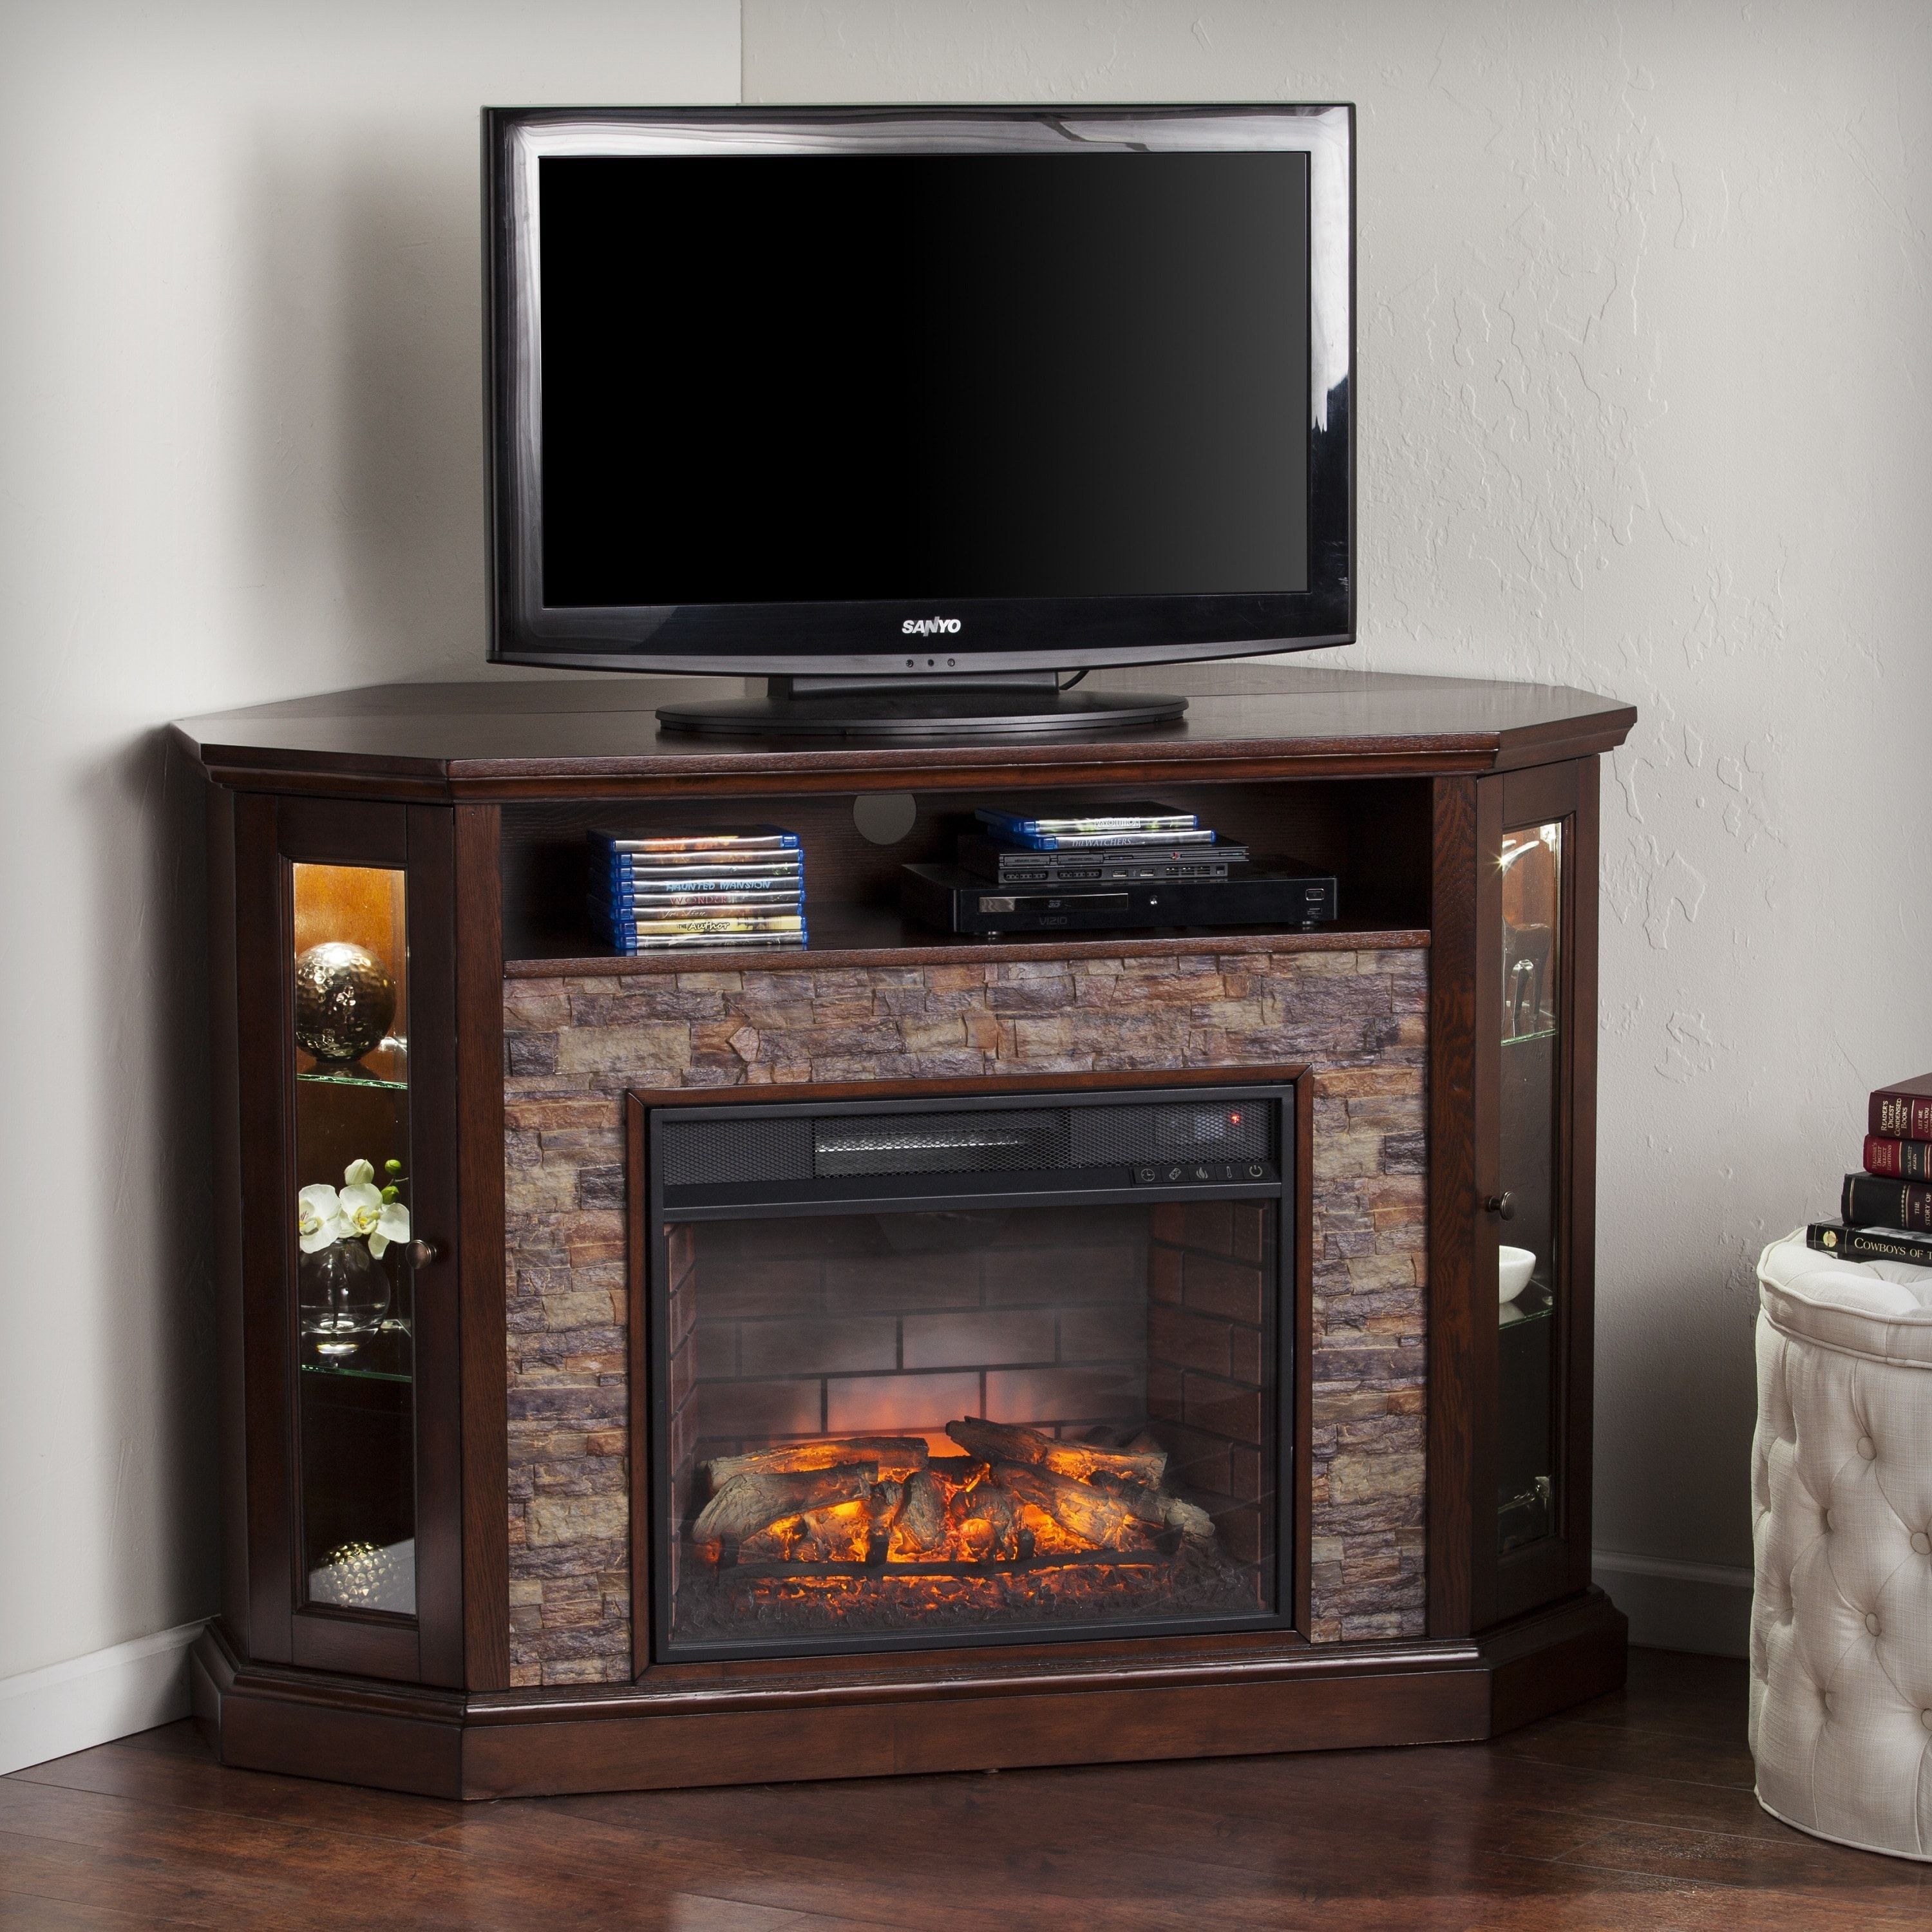 Fireplace Tv Stand 70 Inch New Harper Blvd Ratner Faux Stone Corner Convertible Infrared